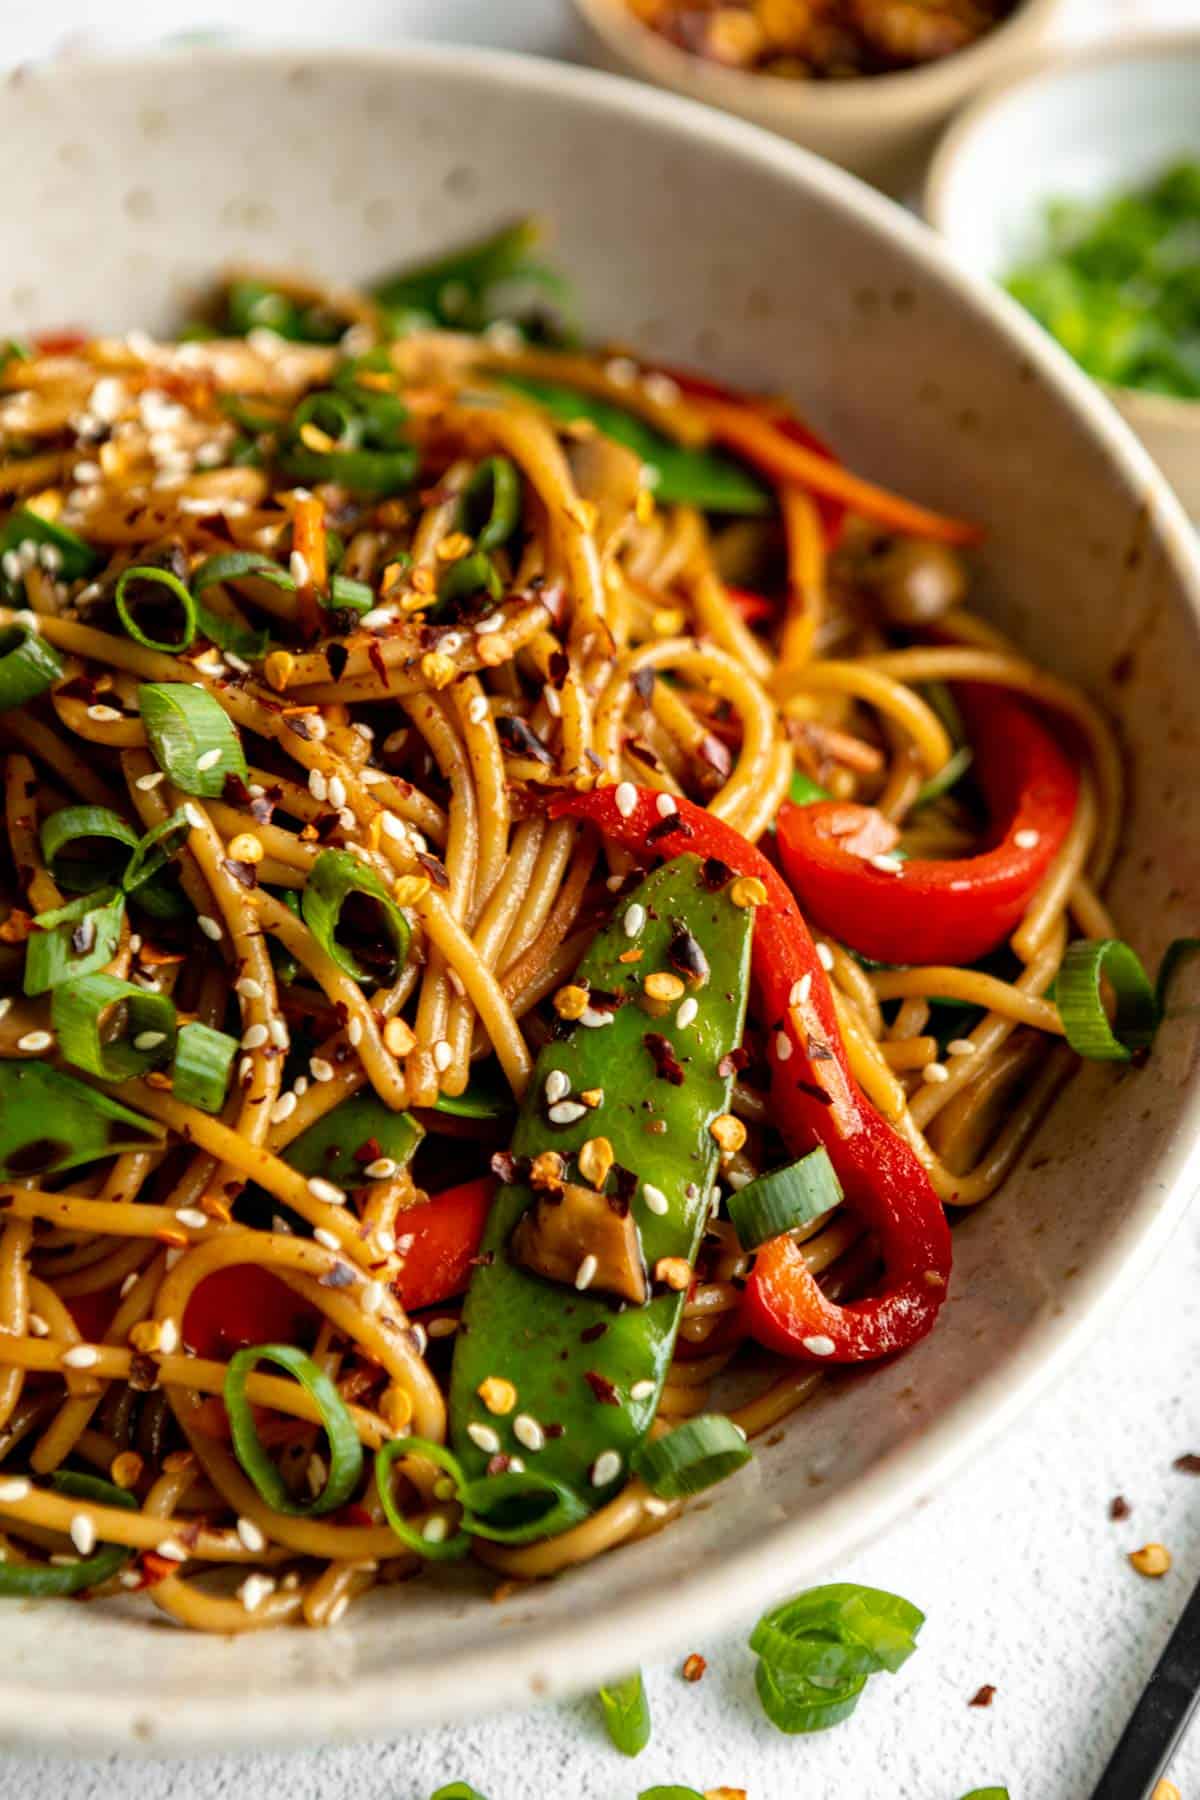 angled view of the vegetable lo mein with chopsticks in a bowl